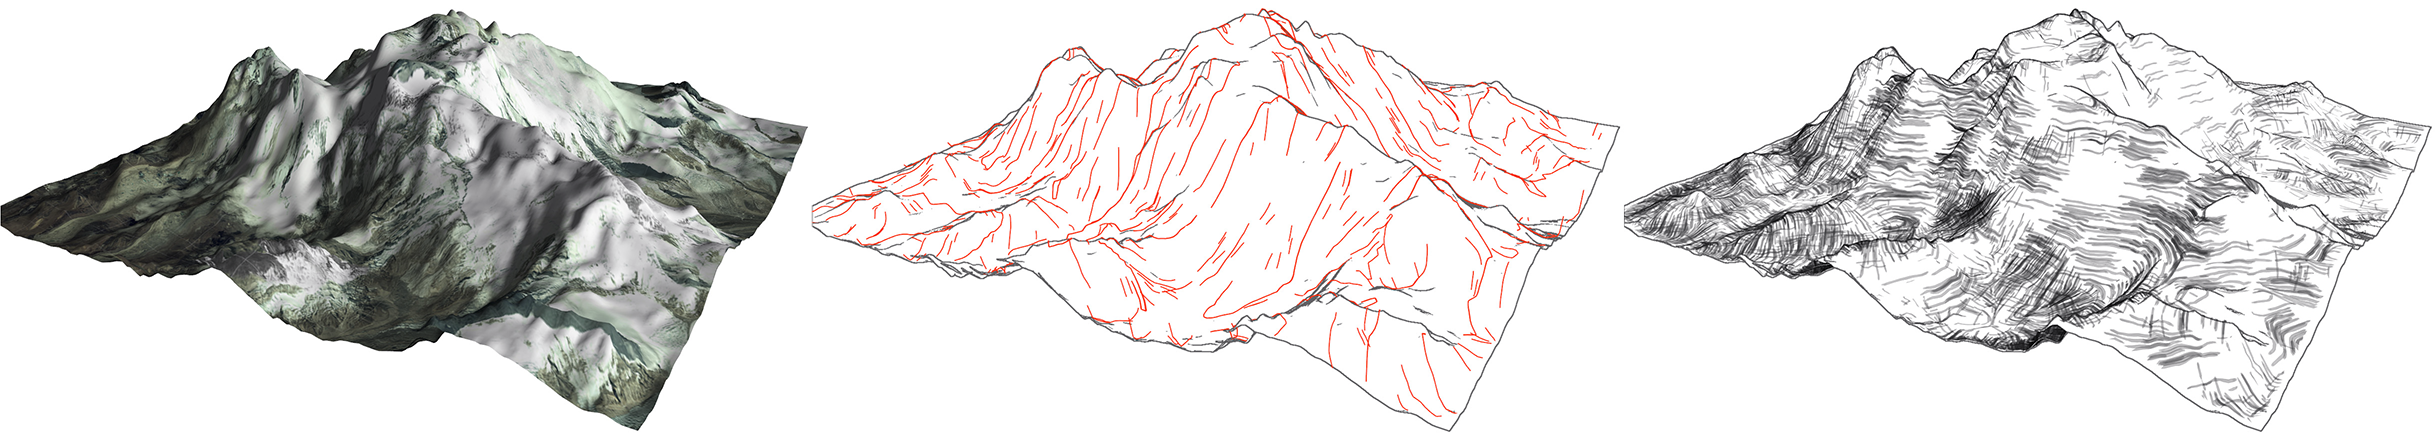 Teaser of Structure-aware Stylization of Mountainous Terrains